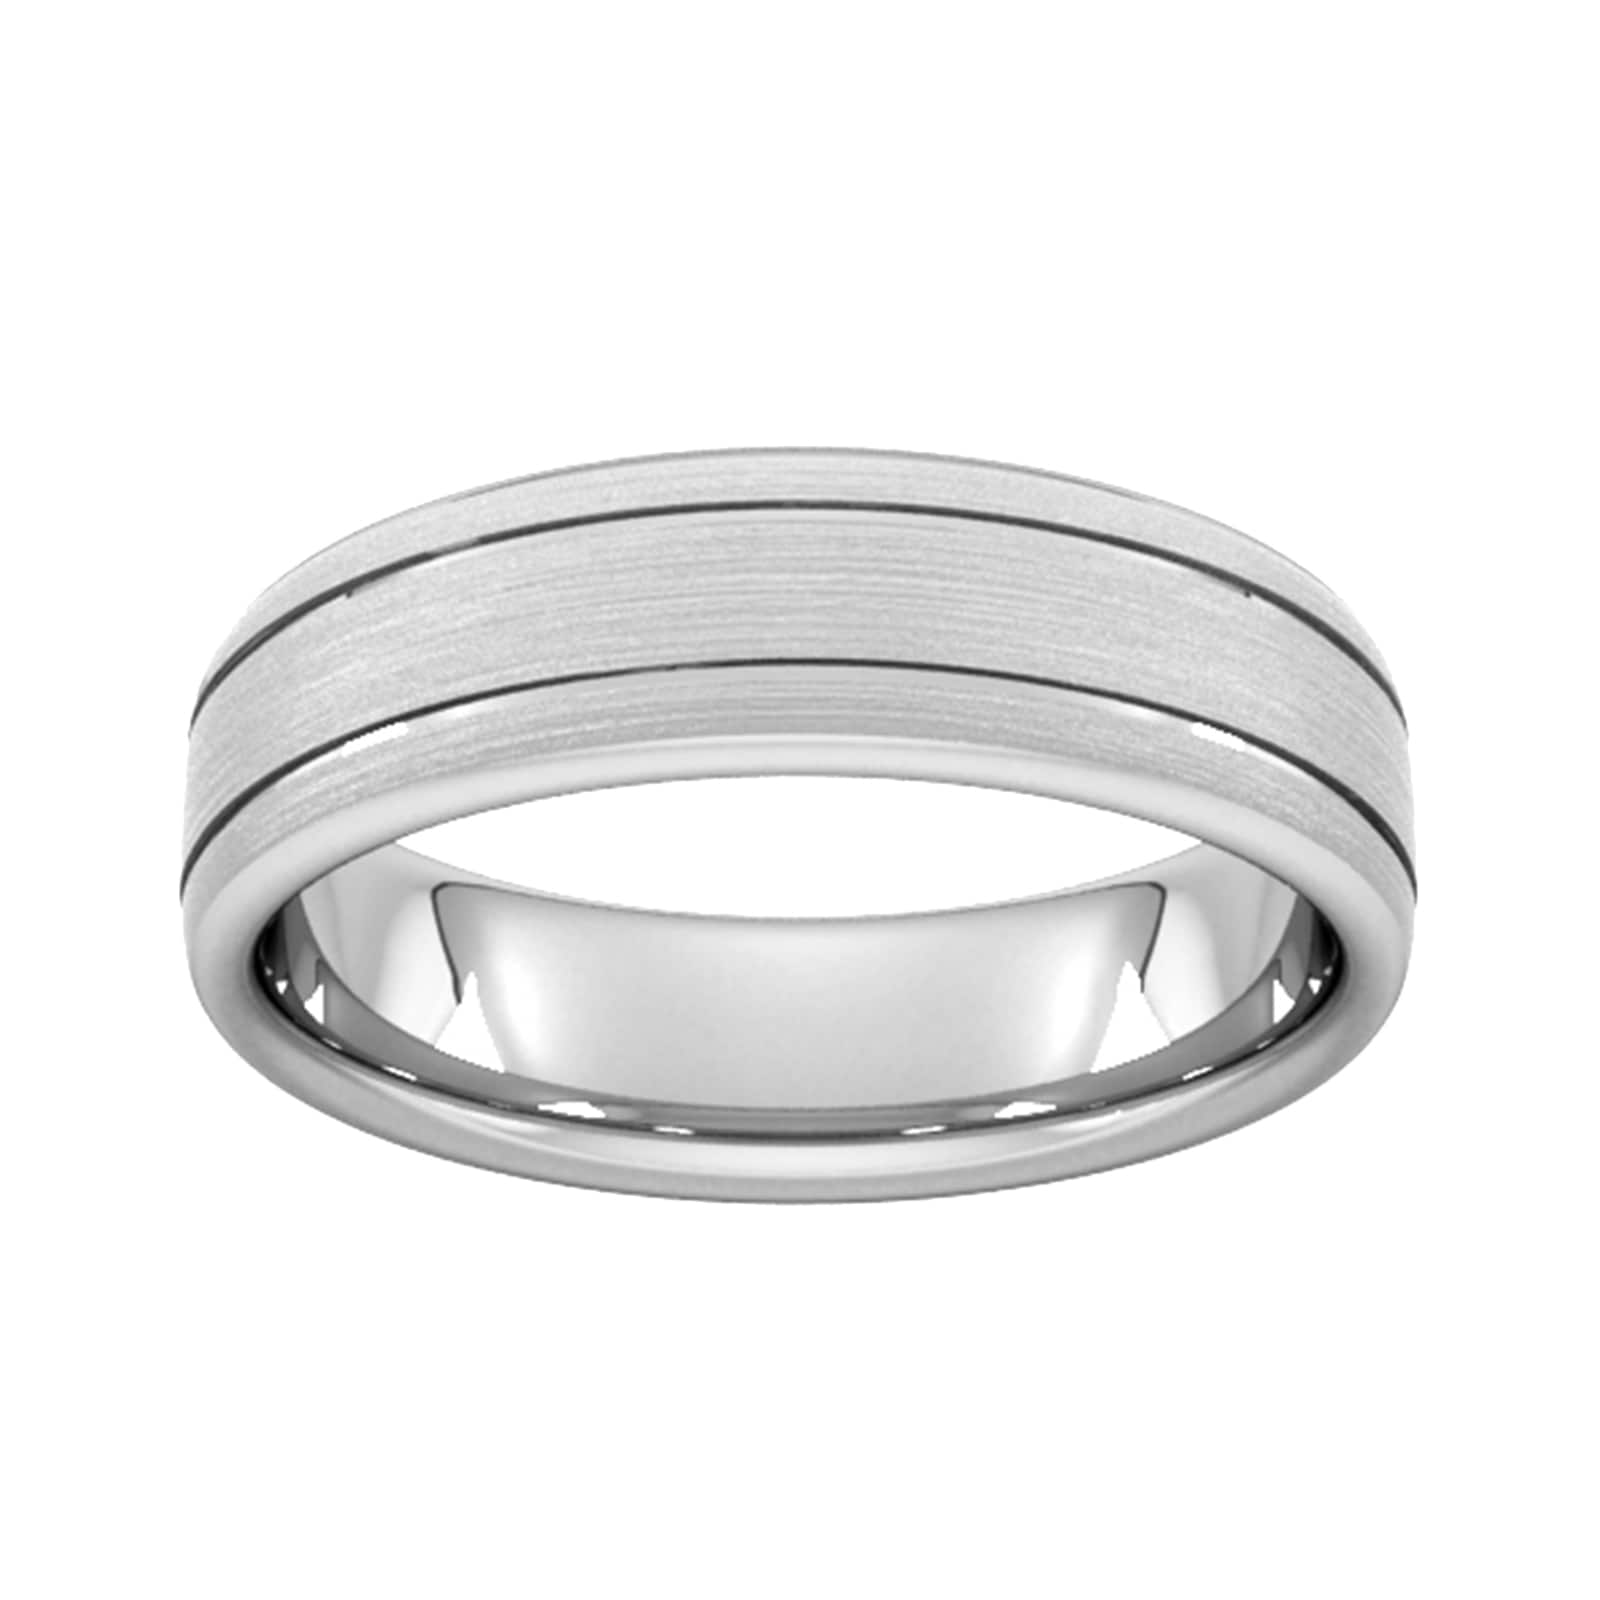 6mm Slight Court Heavy Matt Finish With Double Grooves Wedding Ring In 950 Palladium - Ring Size L